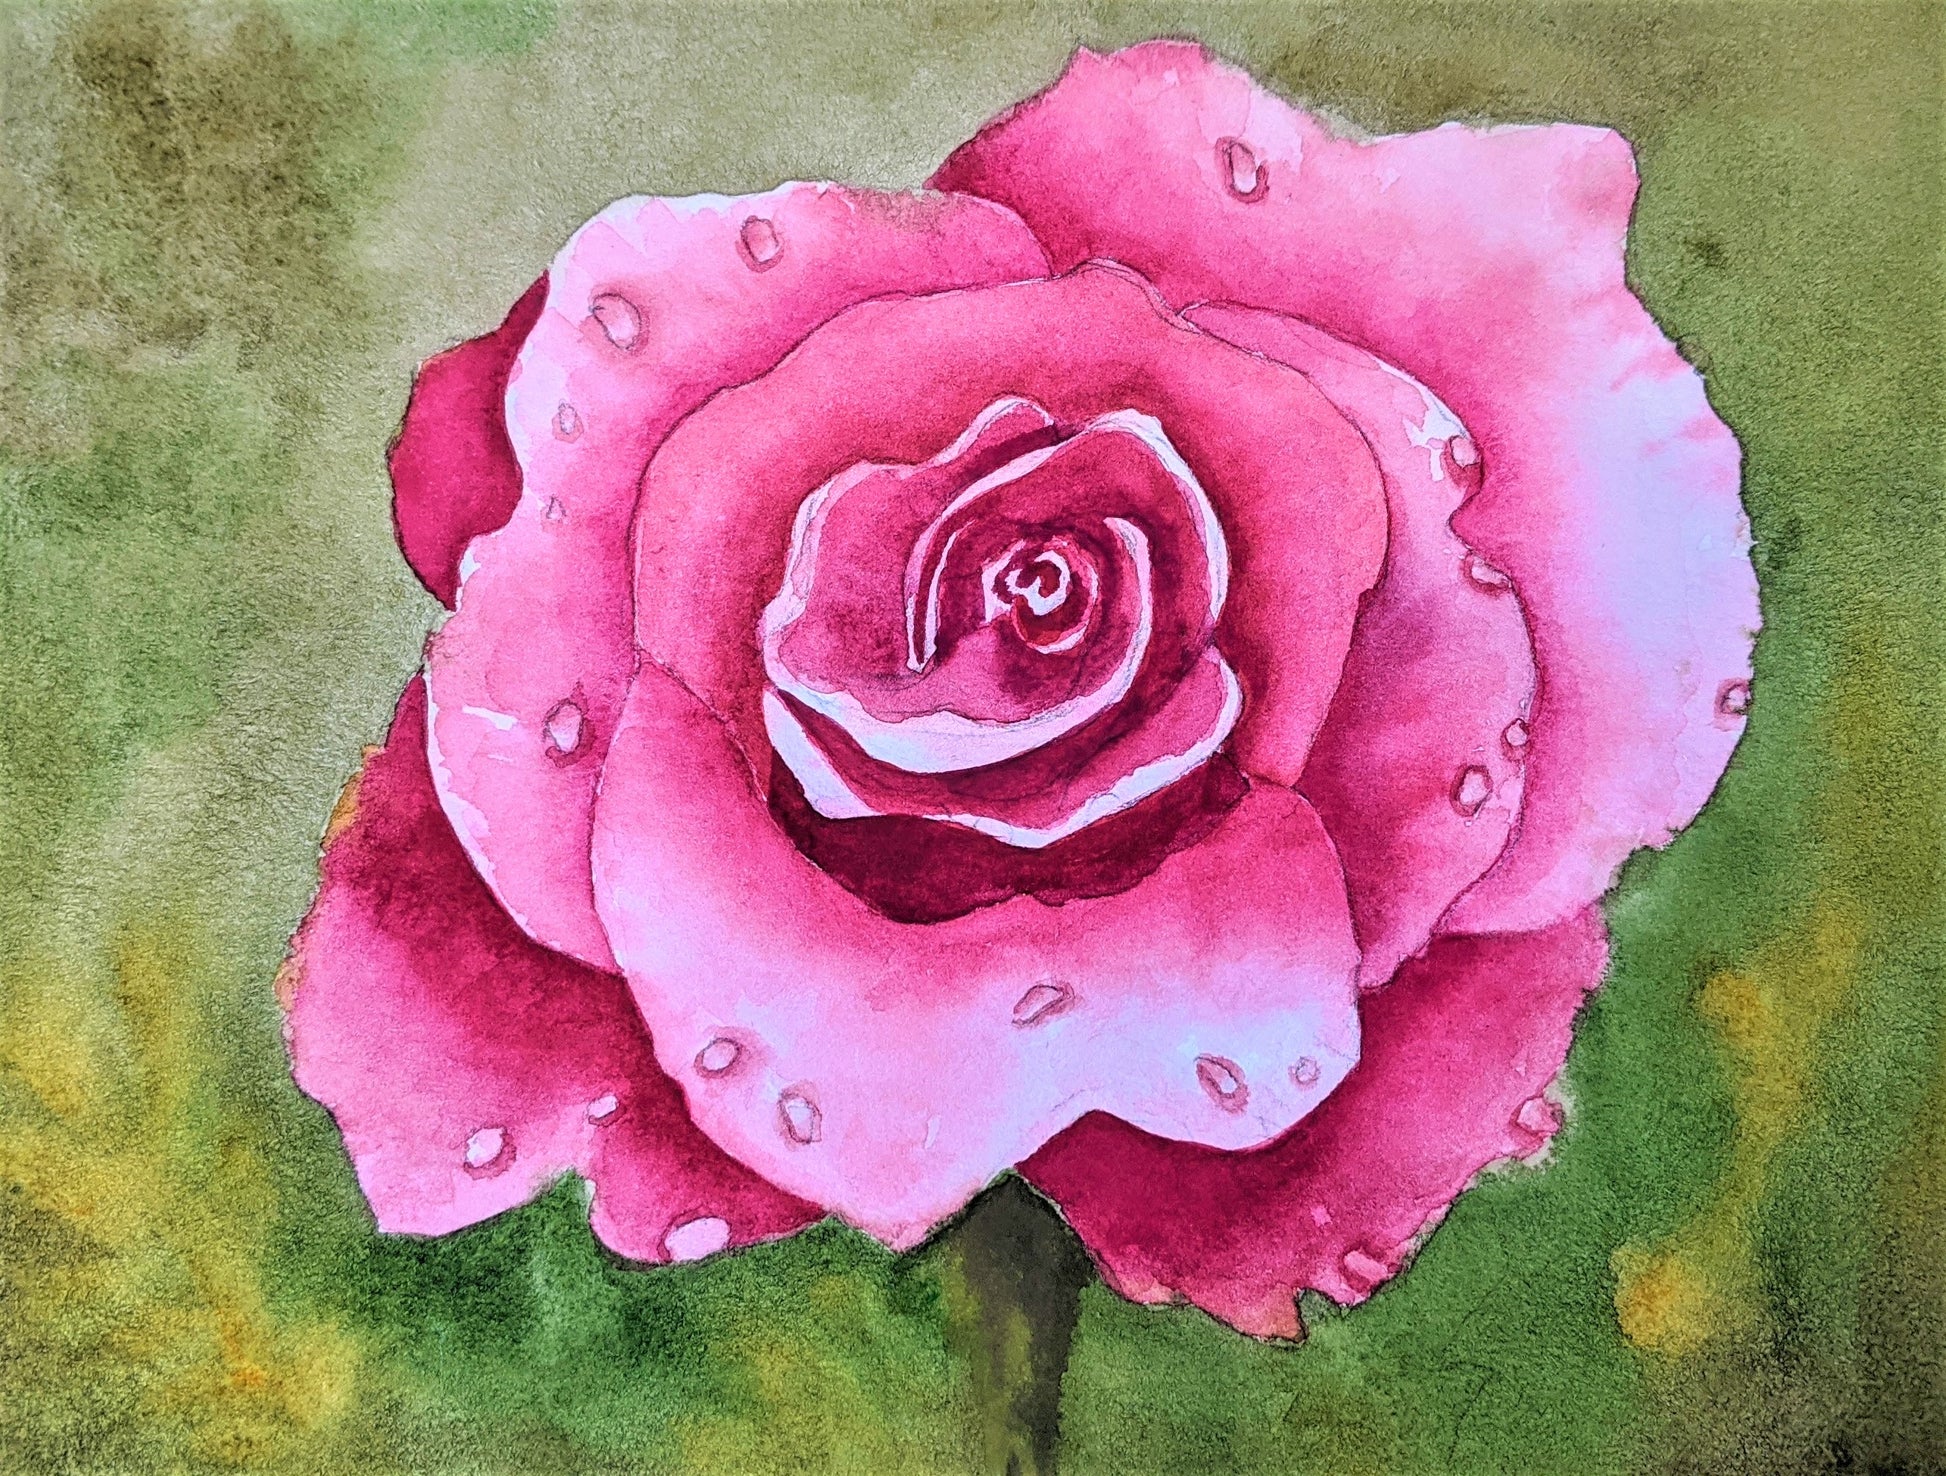 Dewdrops on a rose watercolor painting